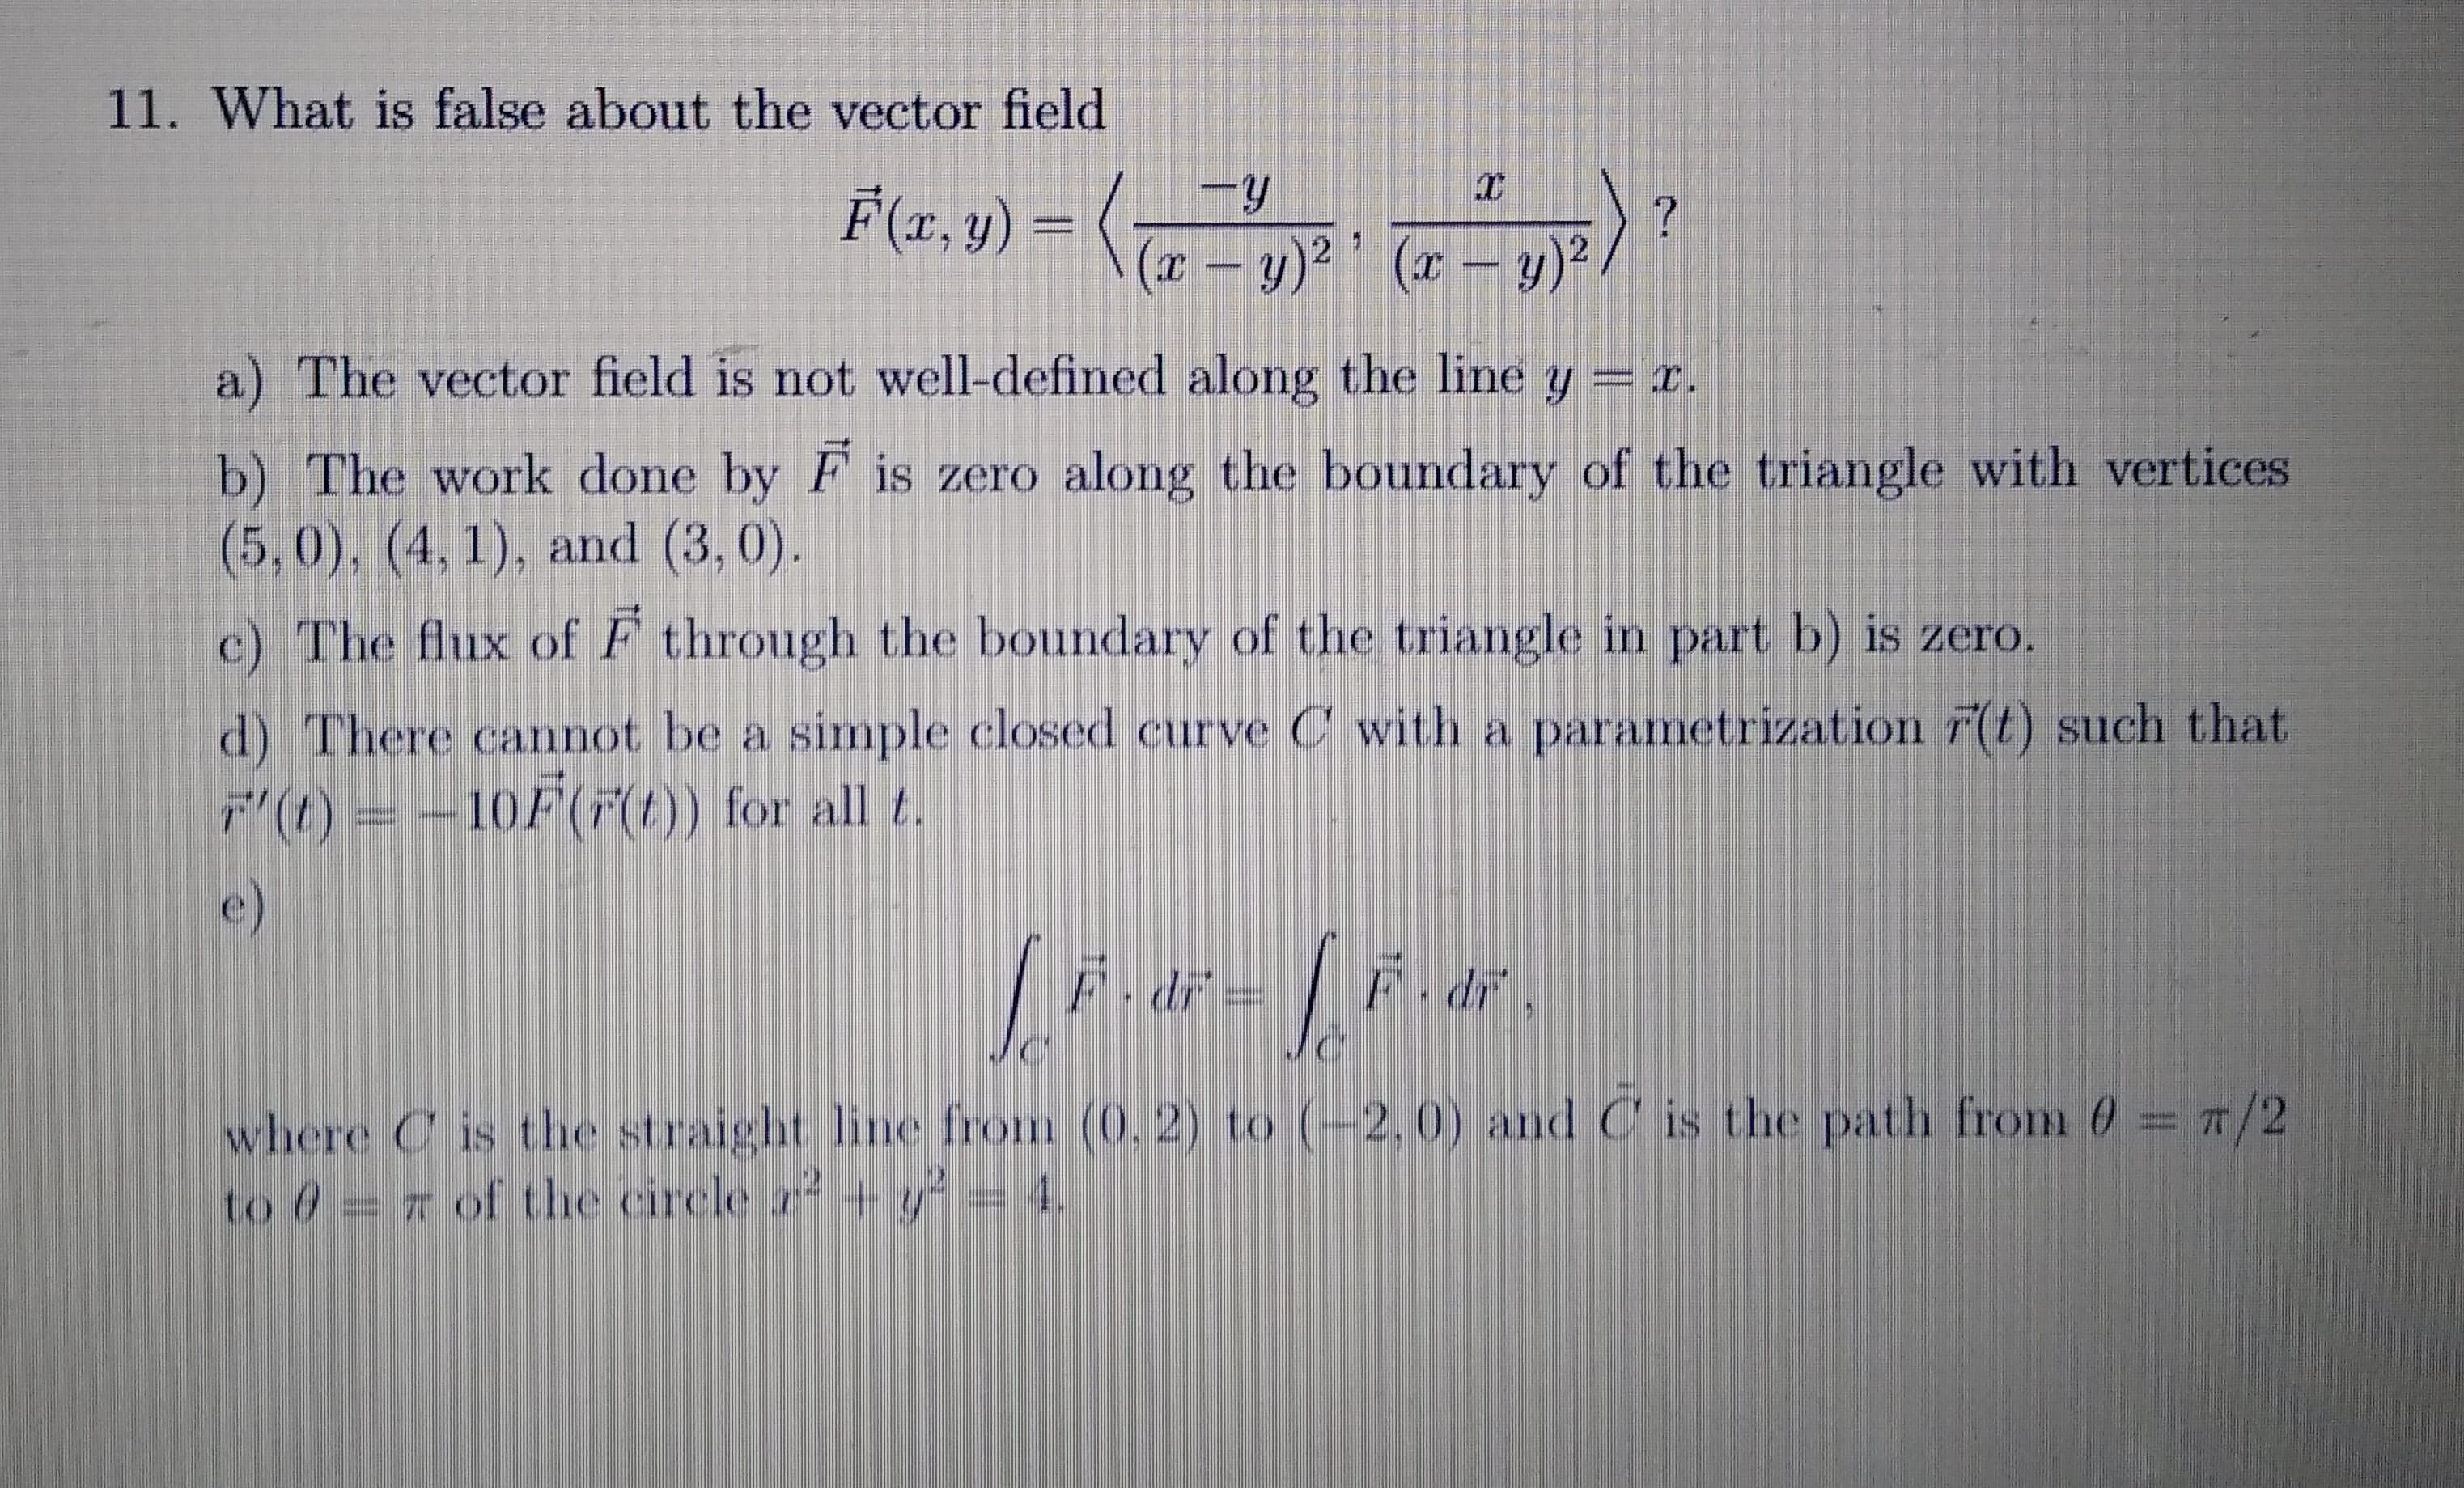 What is false about the vector field
F(x, y) =
(r – y)² ° (x – y)?.
a) The vector field is not well-defined along the line y = r.
b) The work done by F is zero along the boundary of the triangle with vertices
(5,0), (4, 1), and (3, 0).
e) The flux of F through the boundary of the triangle in part b) is zero.
d) There cannot be a simple closed curve C with a parametrization r(t) such that.
(1) =-10F() for all 2.
where Cis the straiglht lne from (0.2) to (-2.0) andC is the path from 0 == 7/2
to =7 of Che leirele a M
